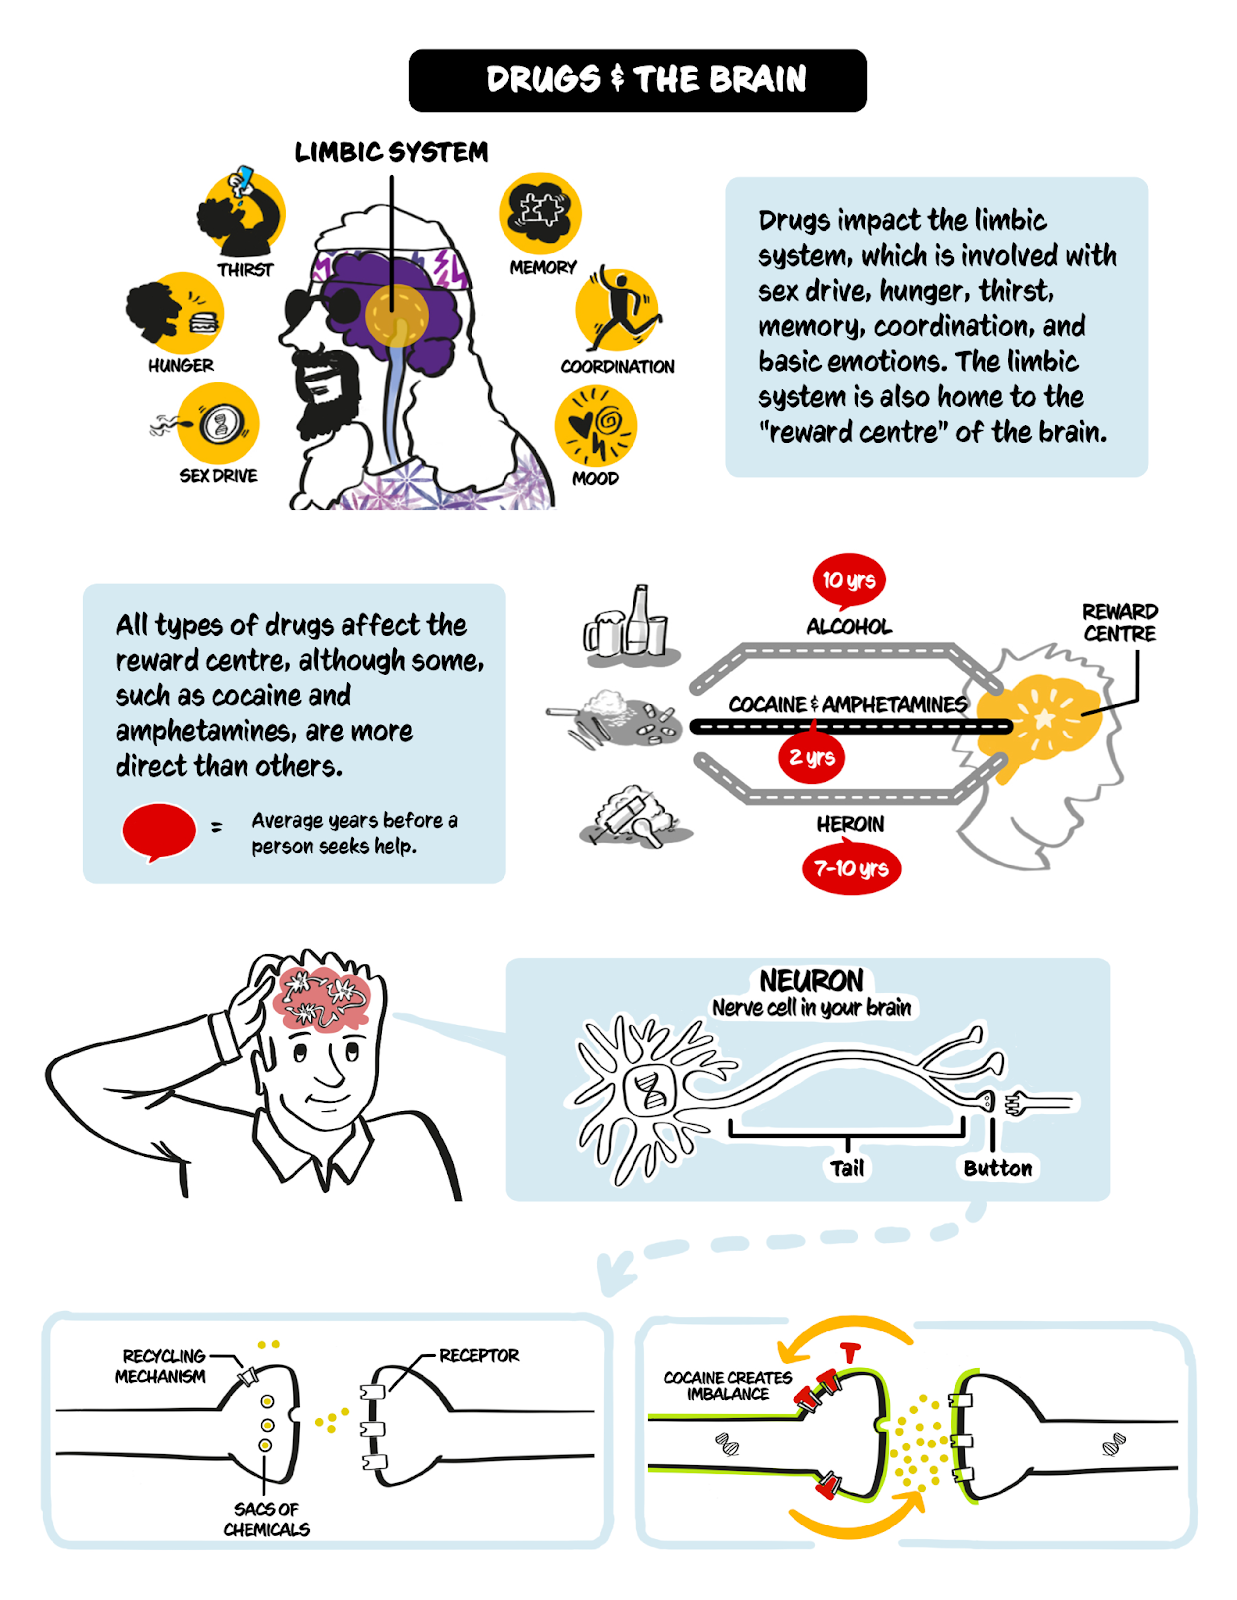 drugs and the brain infographic 